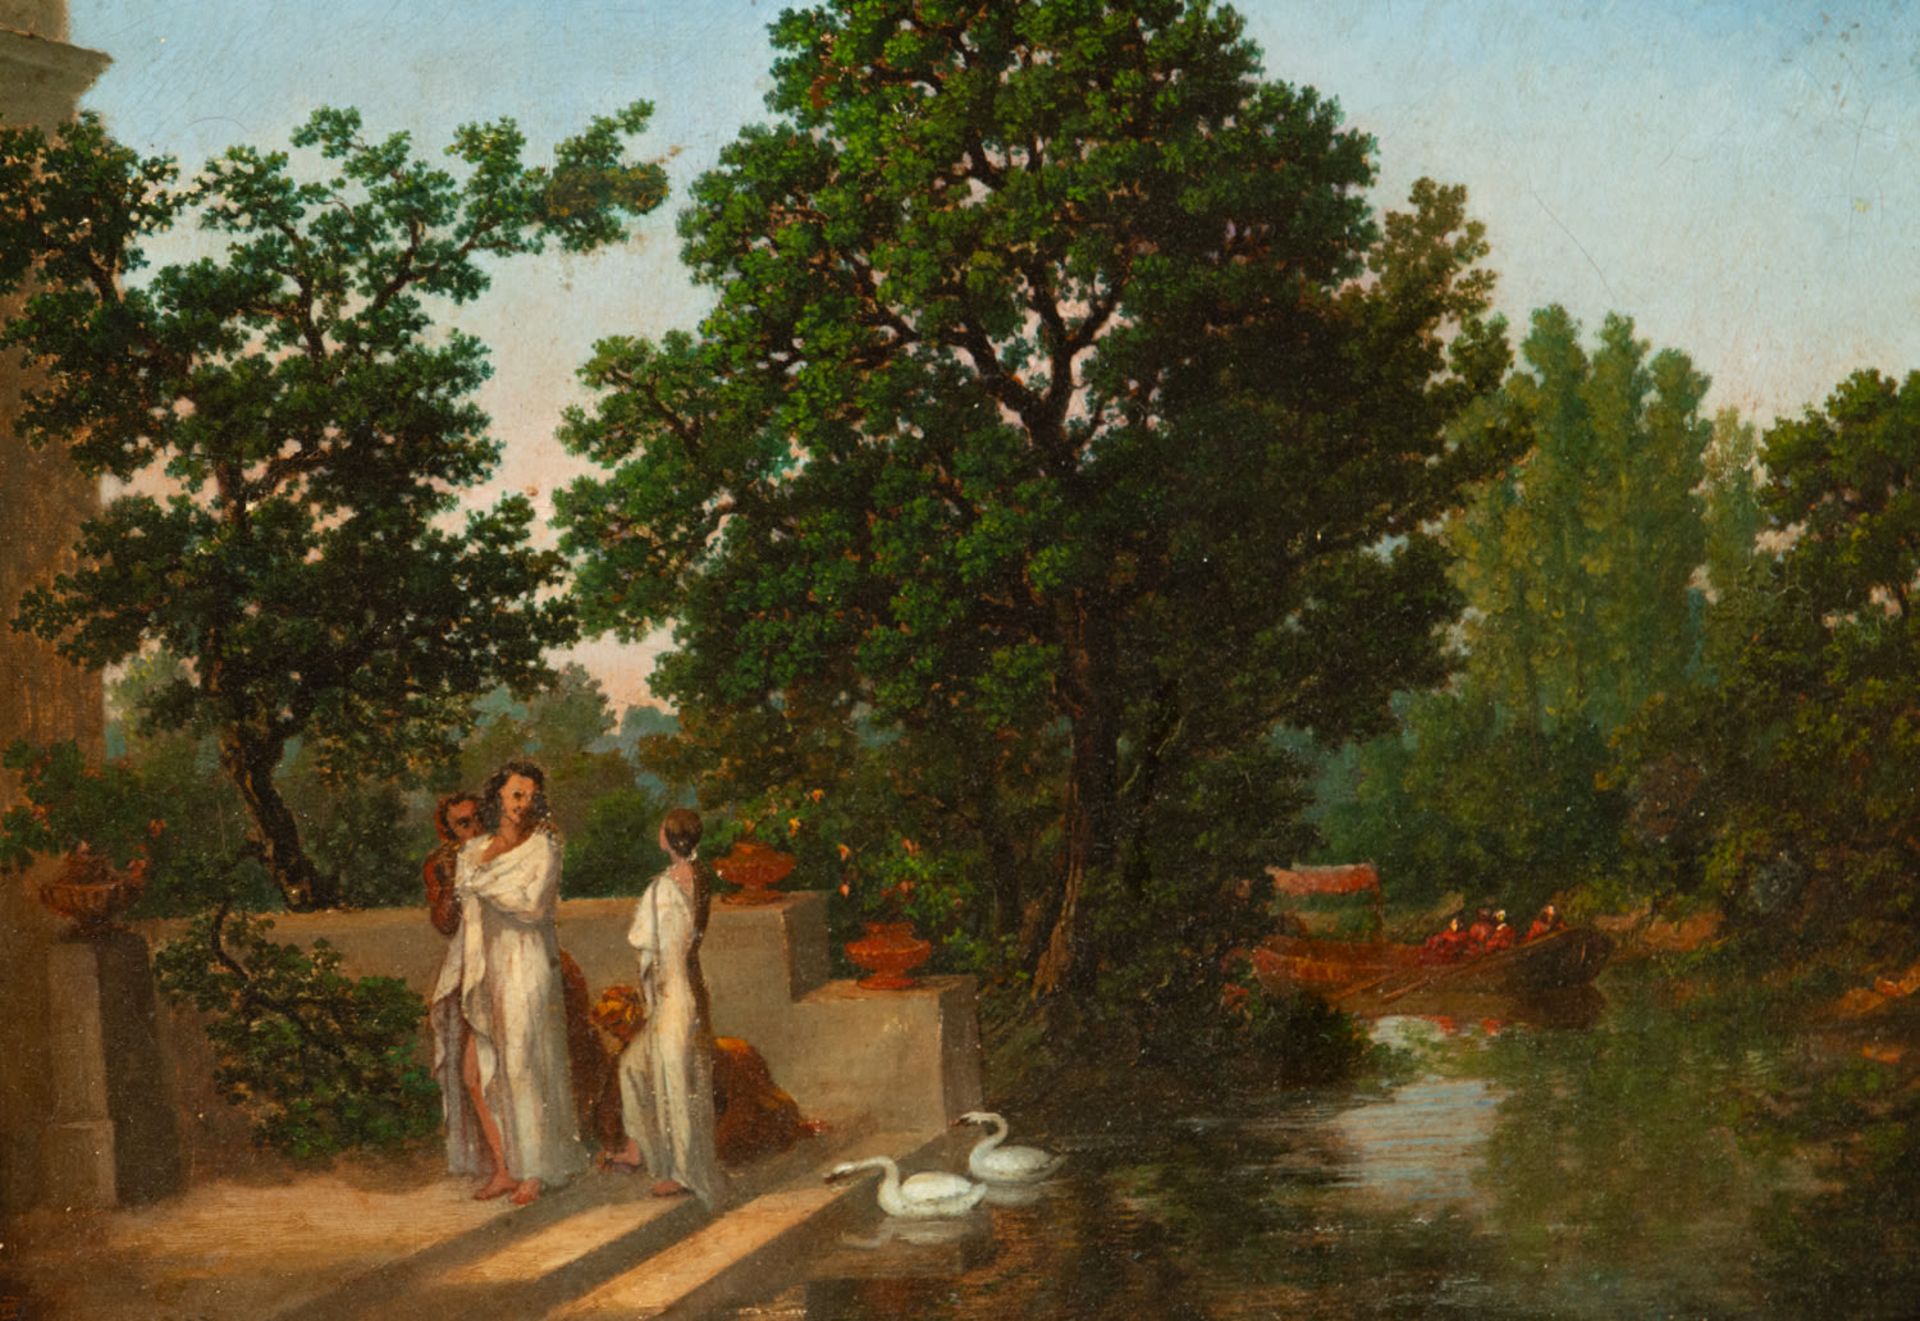 Augustin Toursel (1812 - 1853), signed, Landscape with women and swans, French school, 19th century - Bild 2 aus 6